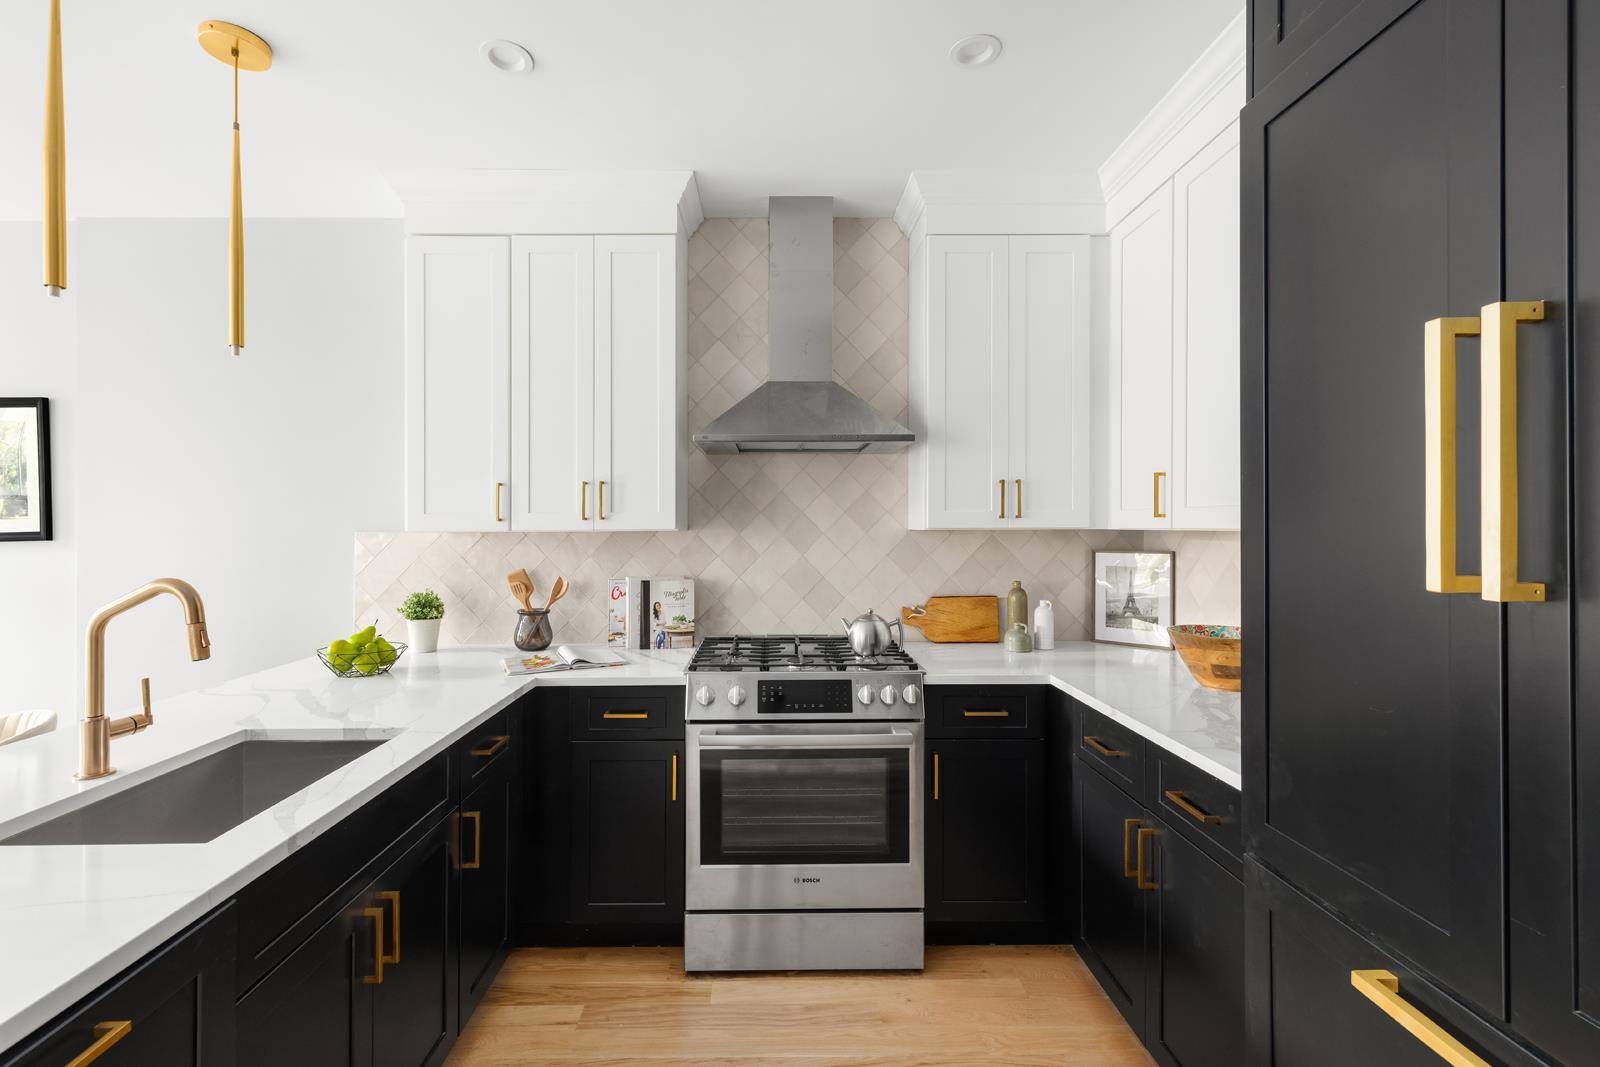 Welcome home to 351 Warren Street, a classic Brooklyn brownstone that has been reborn as four new condominium homes.